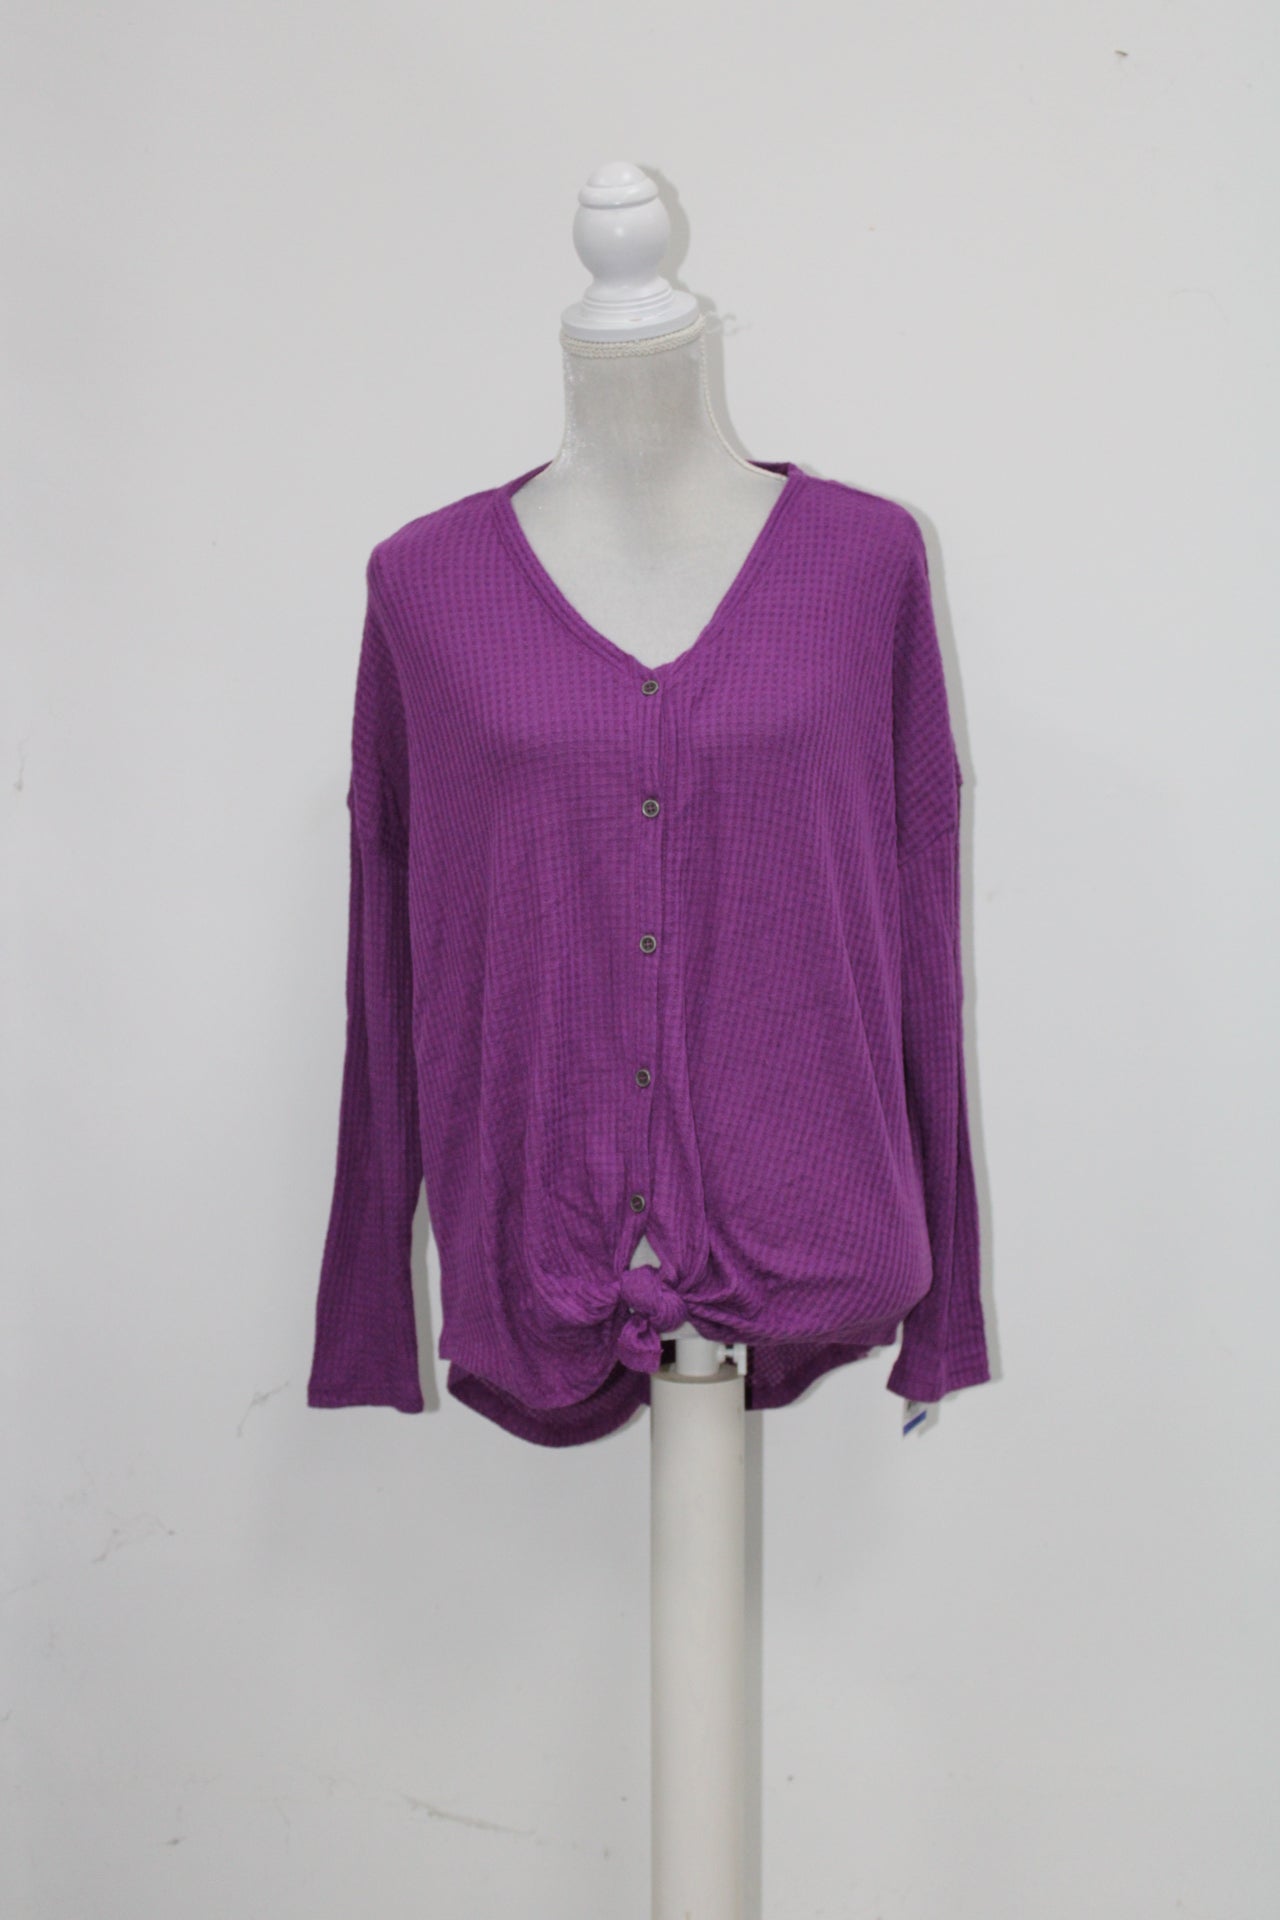 Style & Co. Thermal Button-Front Shirt (Vivid Violet, M)